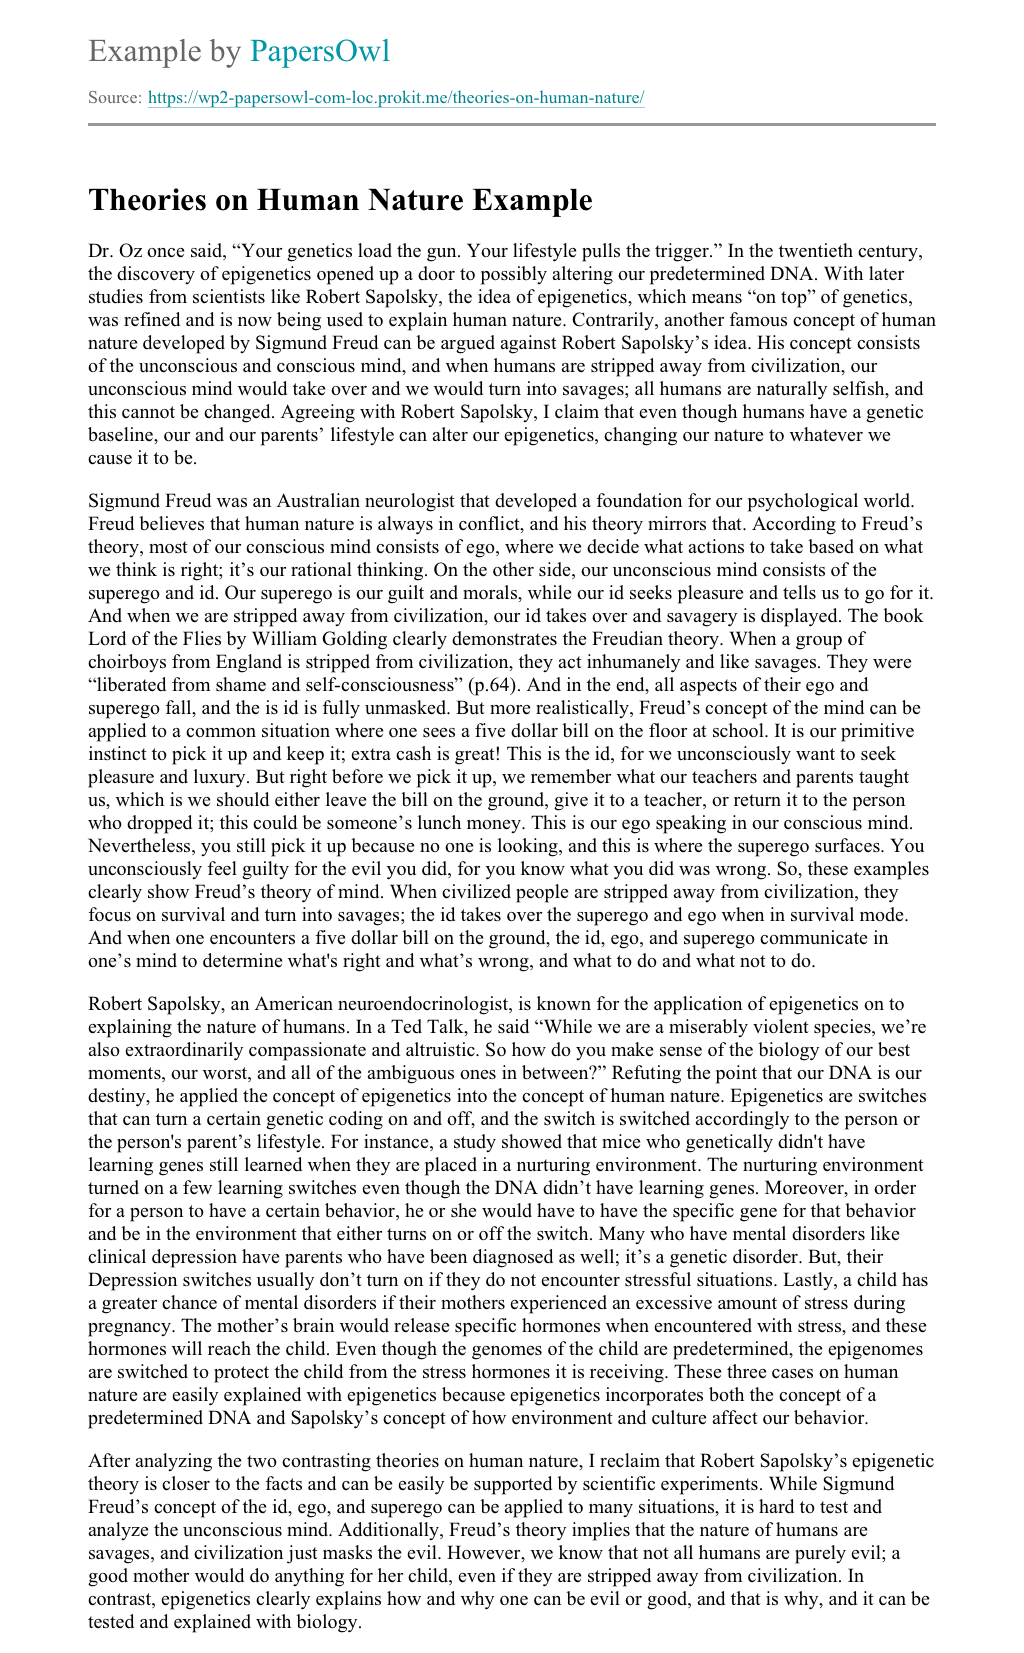 essay about human nature